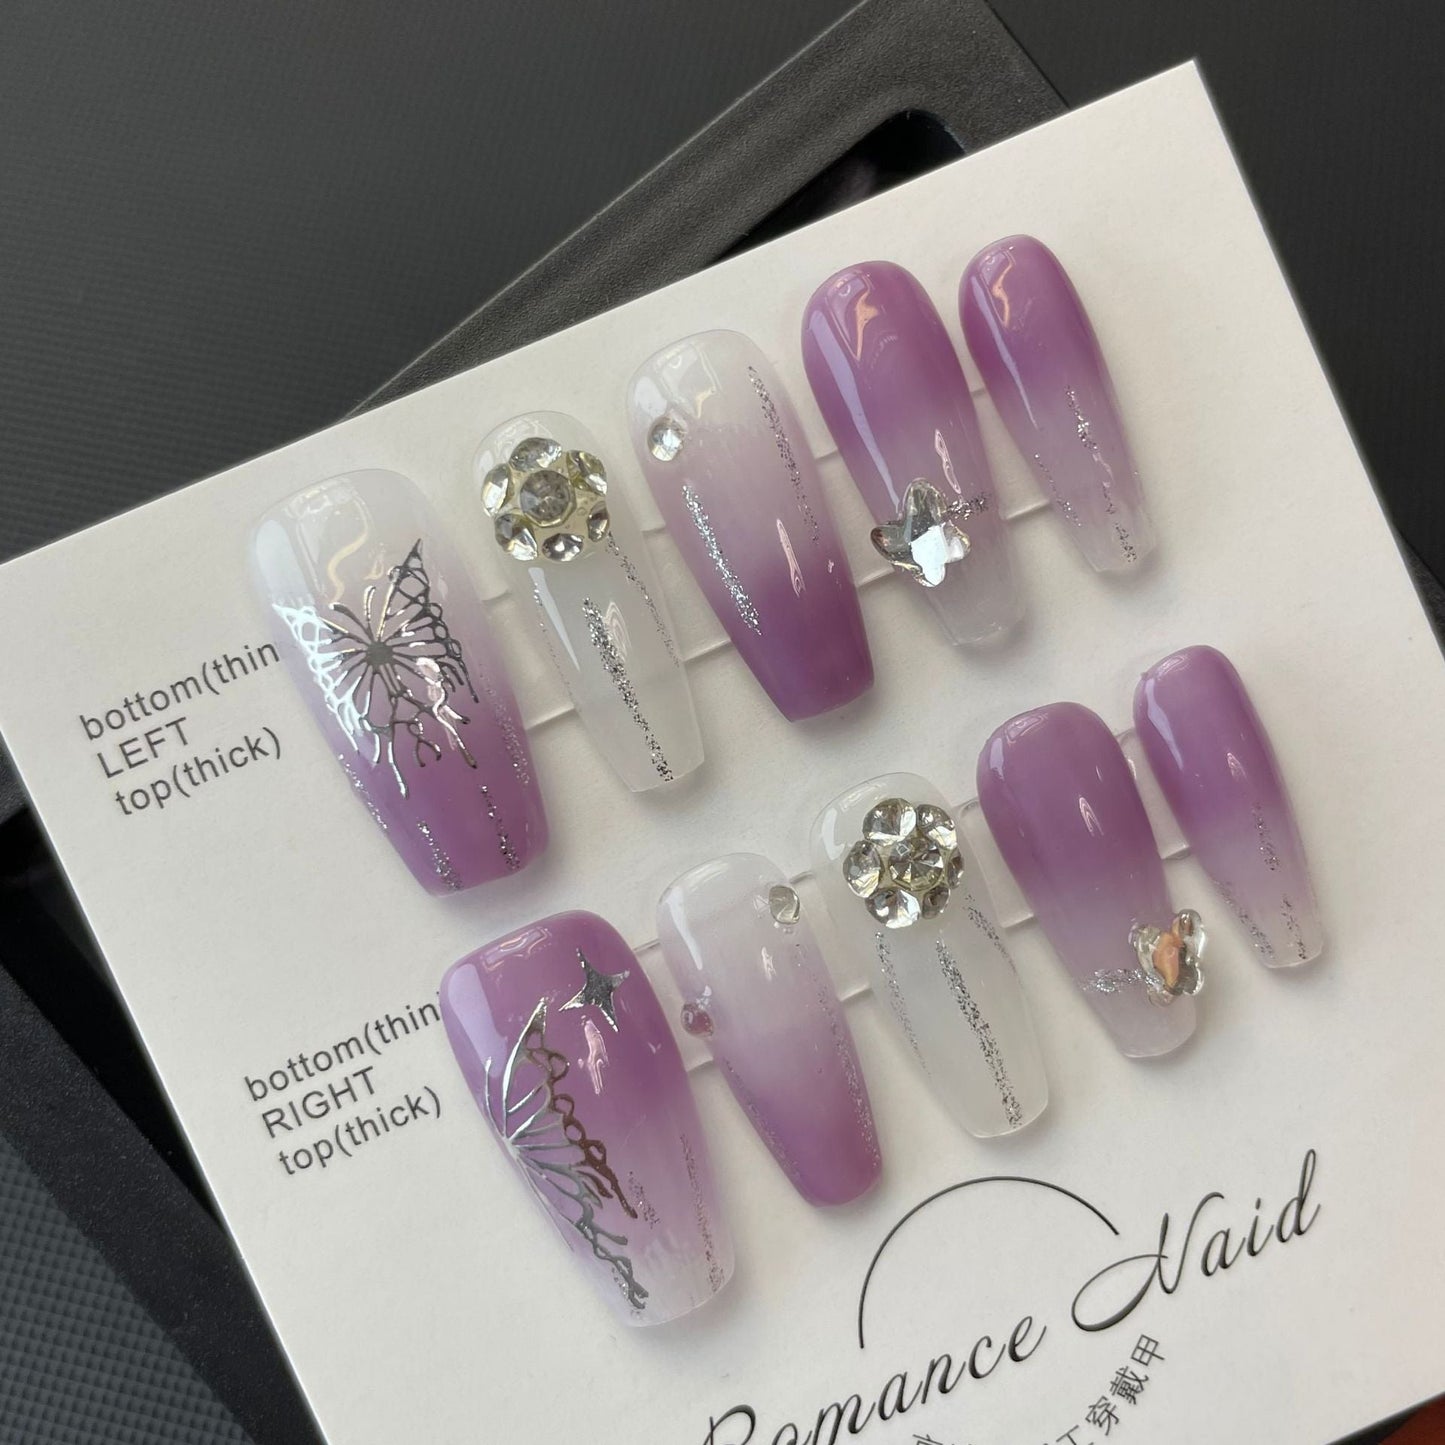 687 butterfly style press on nails 100% handmade false nails white purple